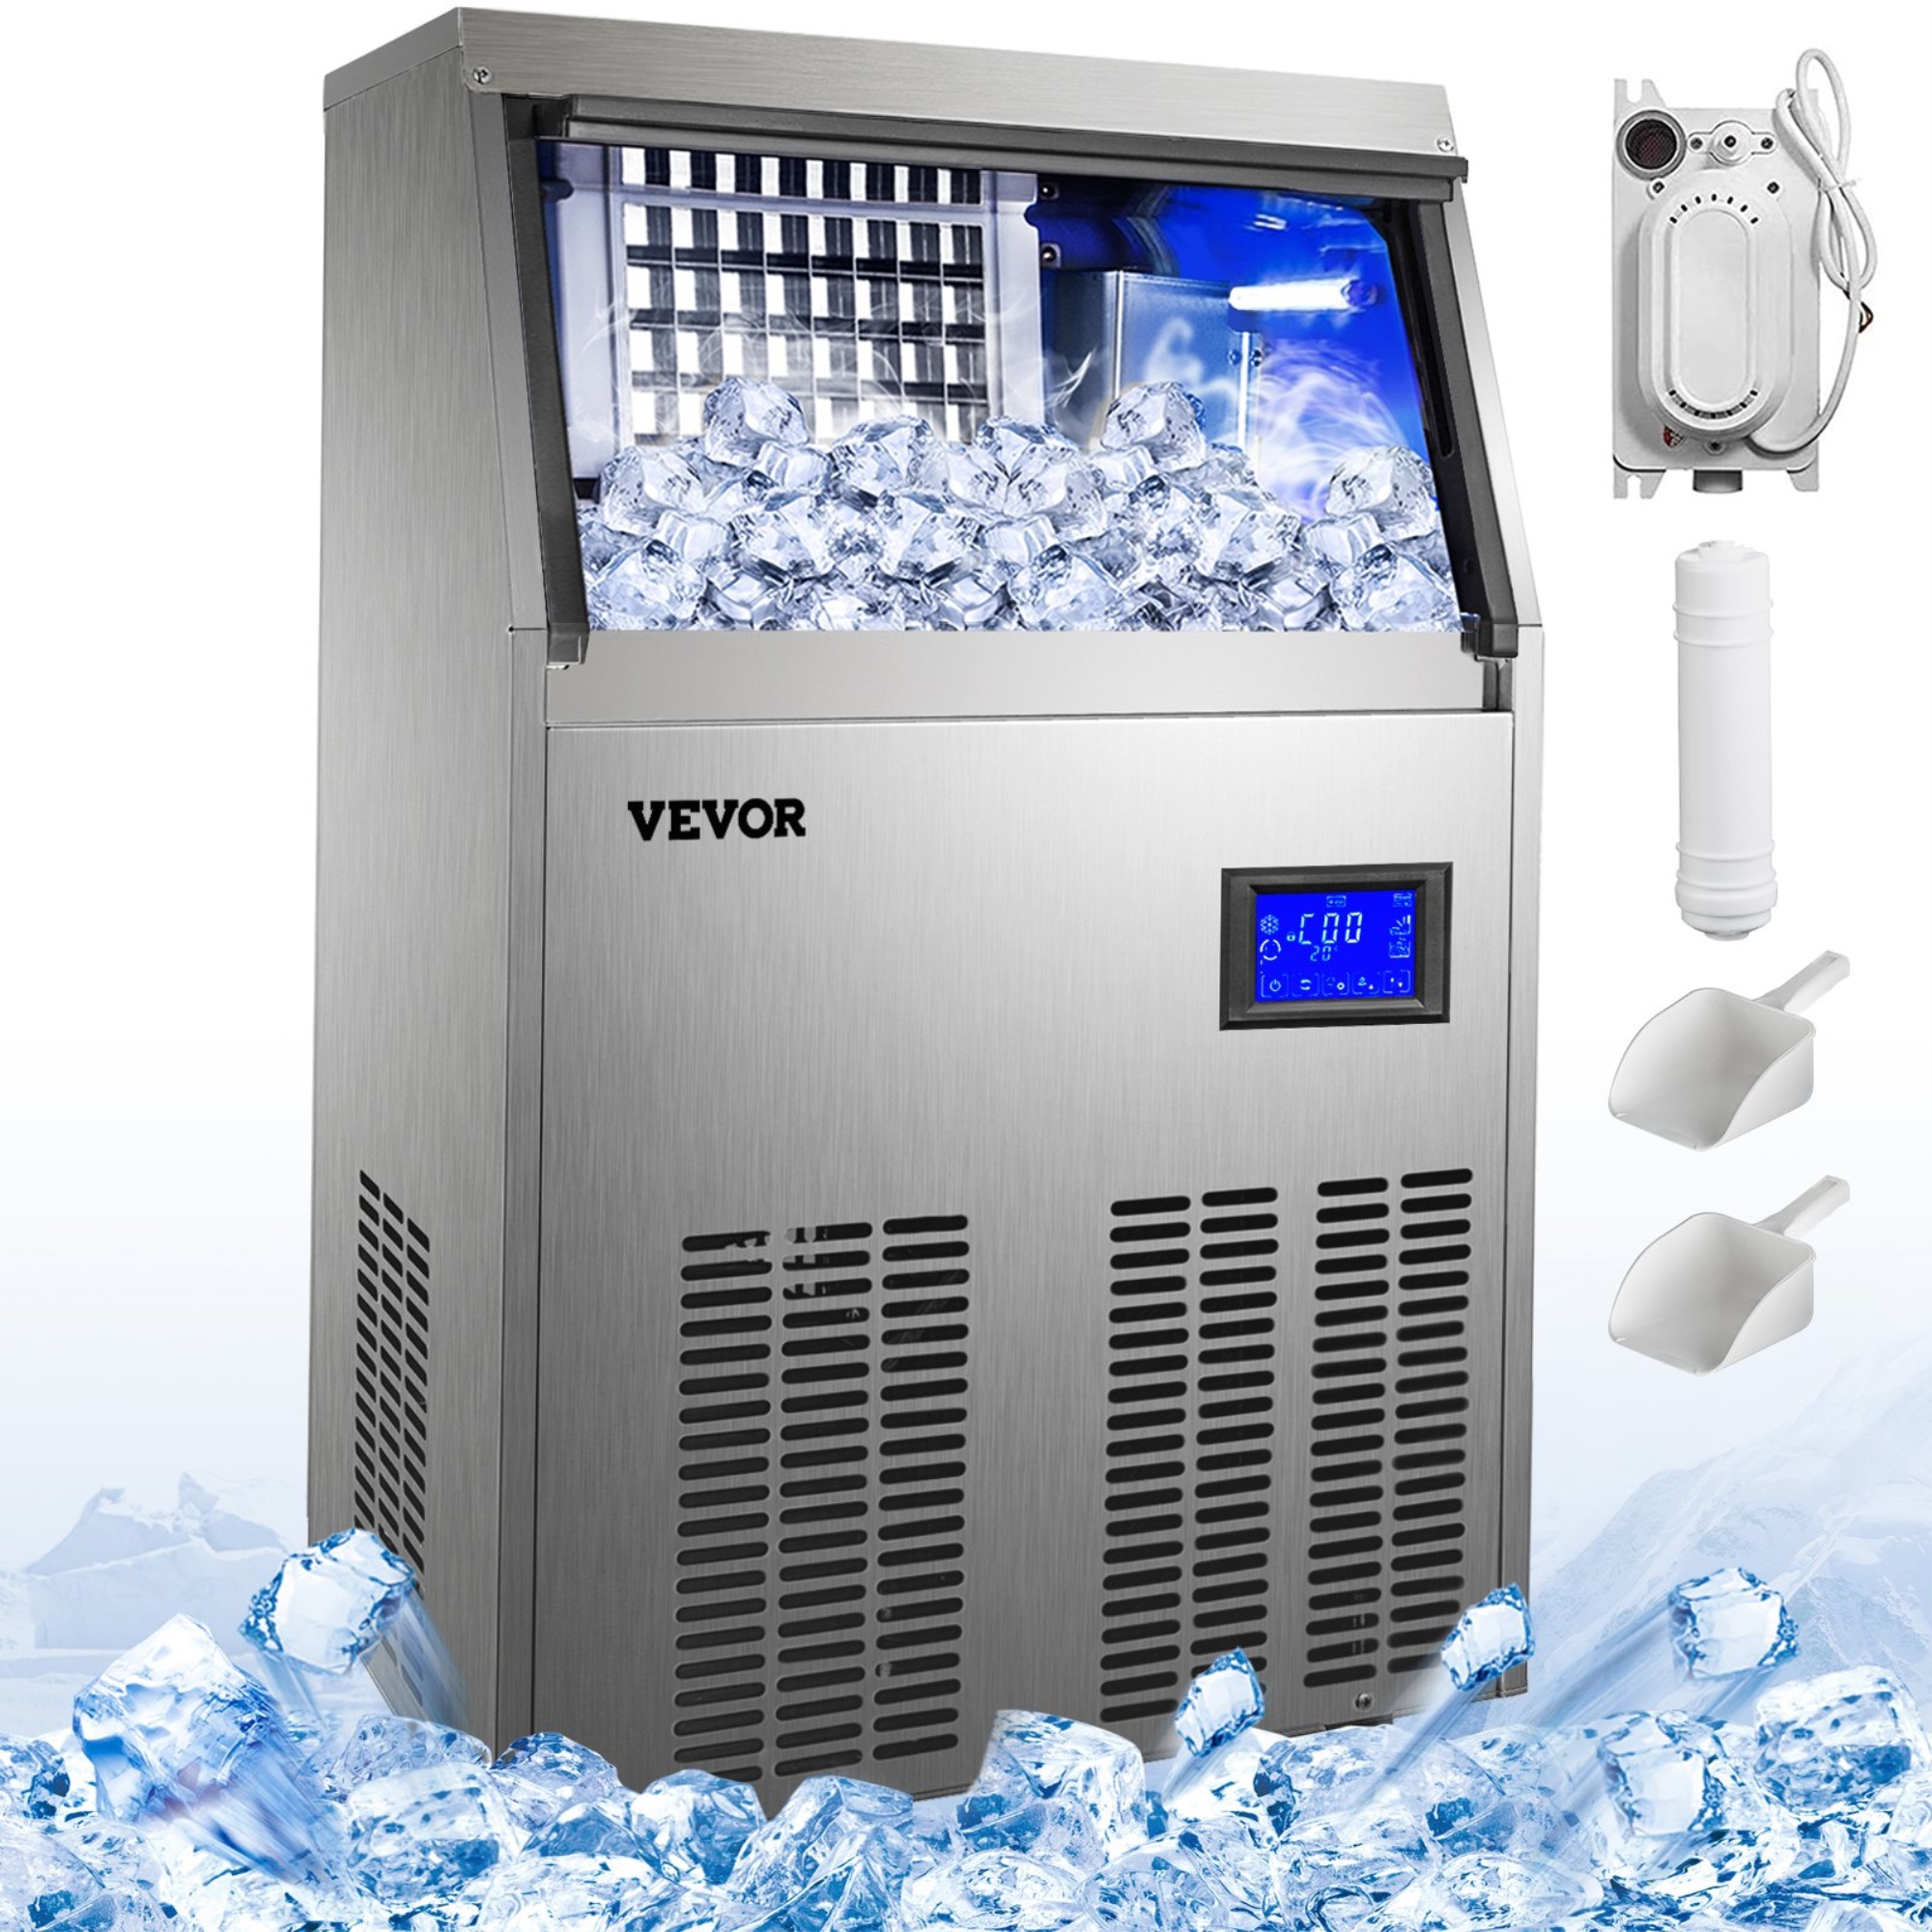 VEVOR 155lbs Commercial Ice Maker Ice Cube Making Machine 70kg Automatic 28lbs Storage